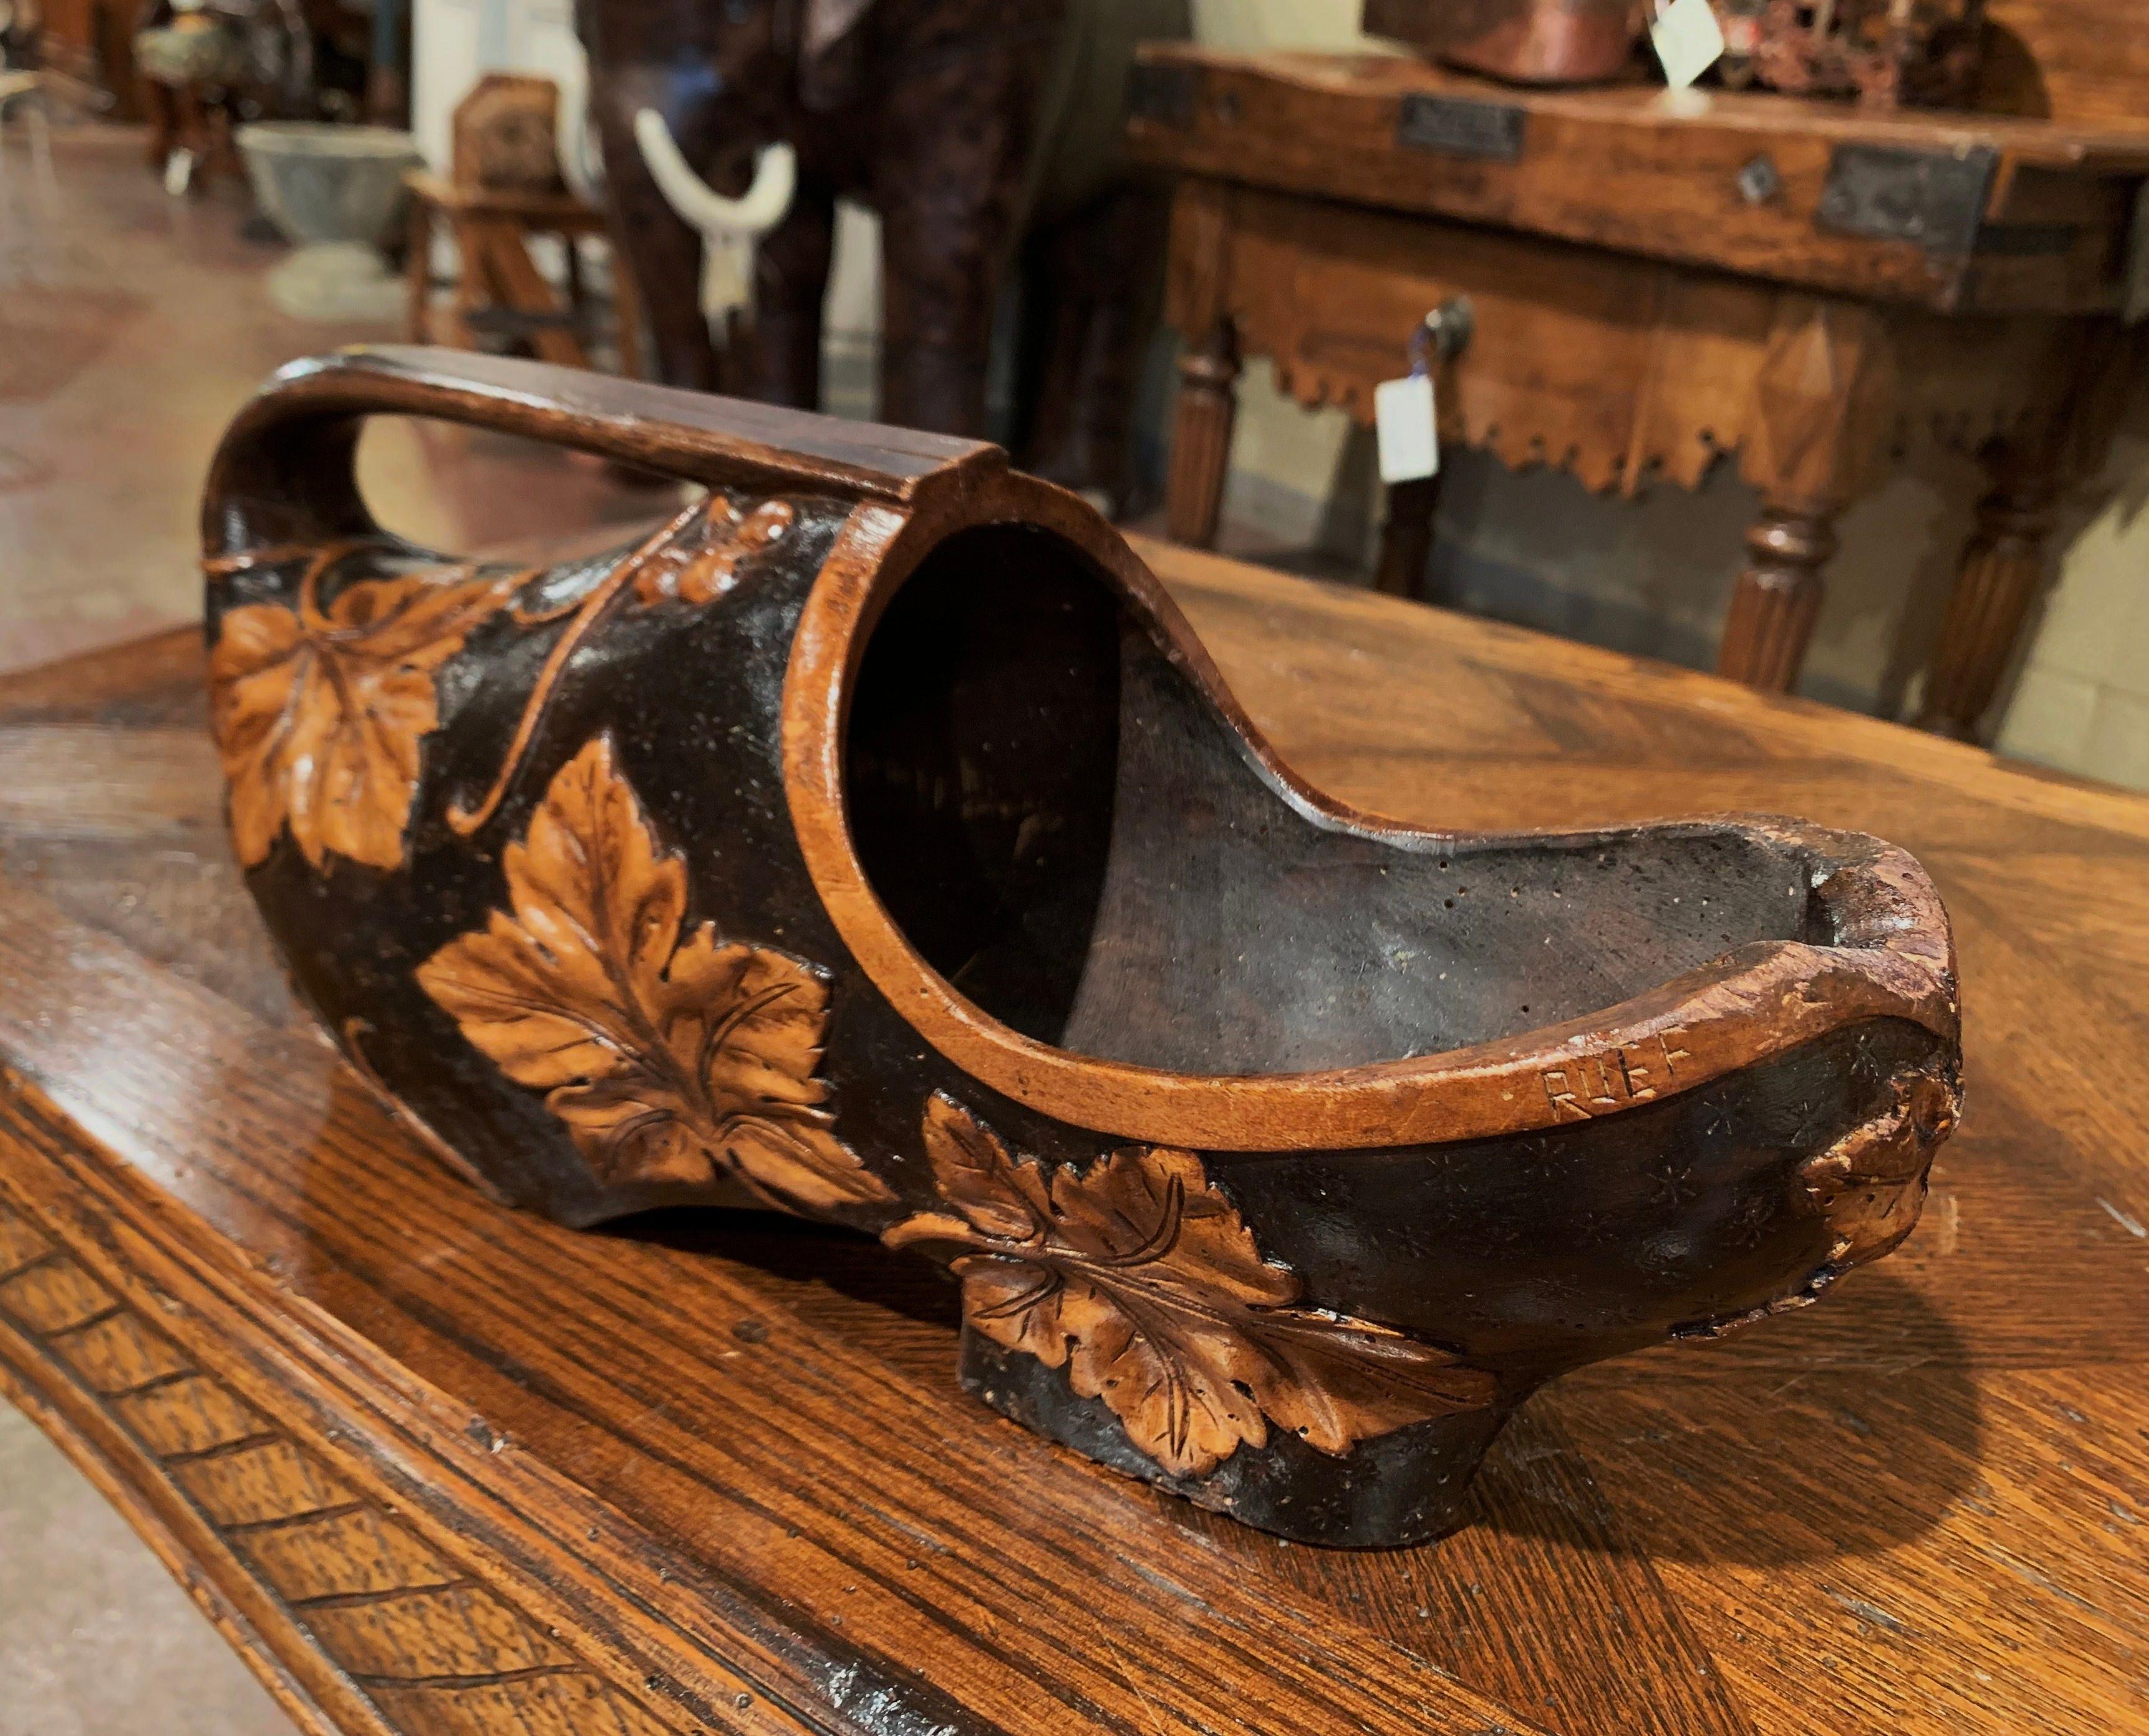 Black Forest Early 20th Century French Carved Walnut Wine Bottle Holder Clog with Vine Decor For Sale